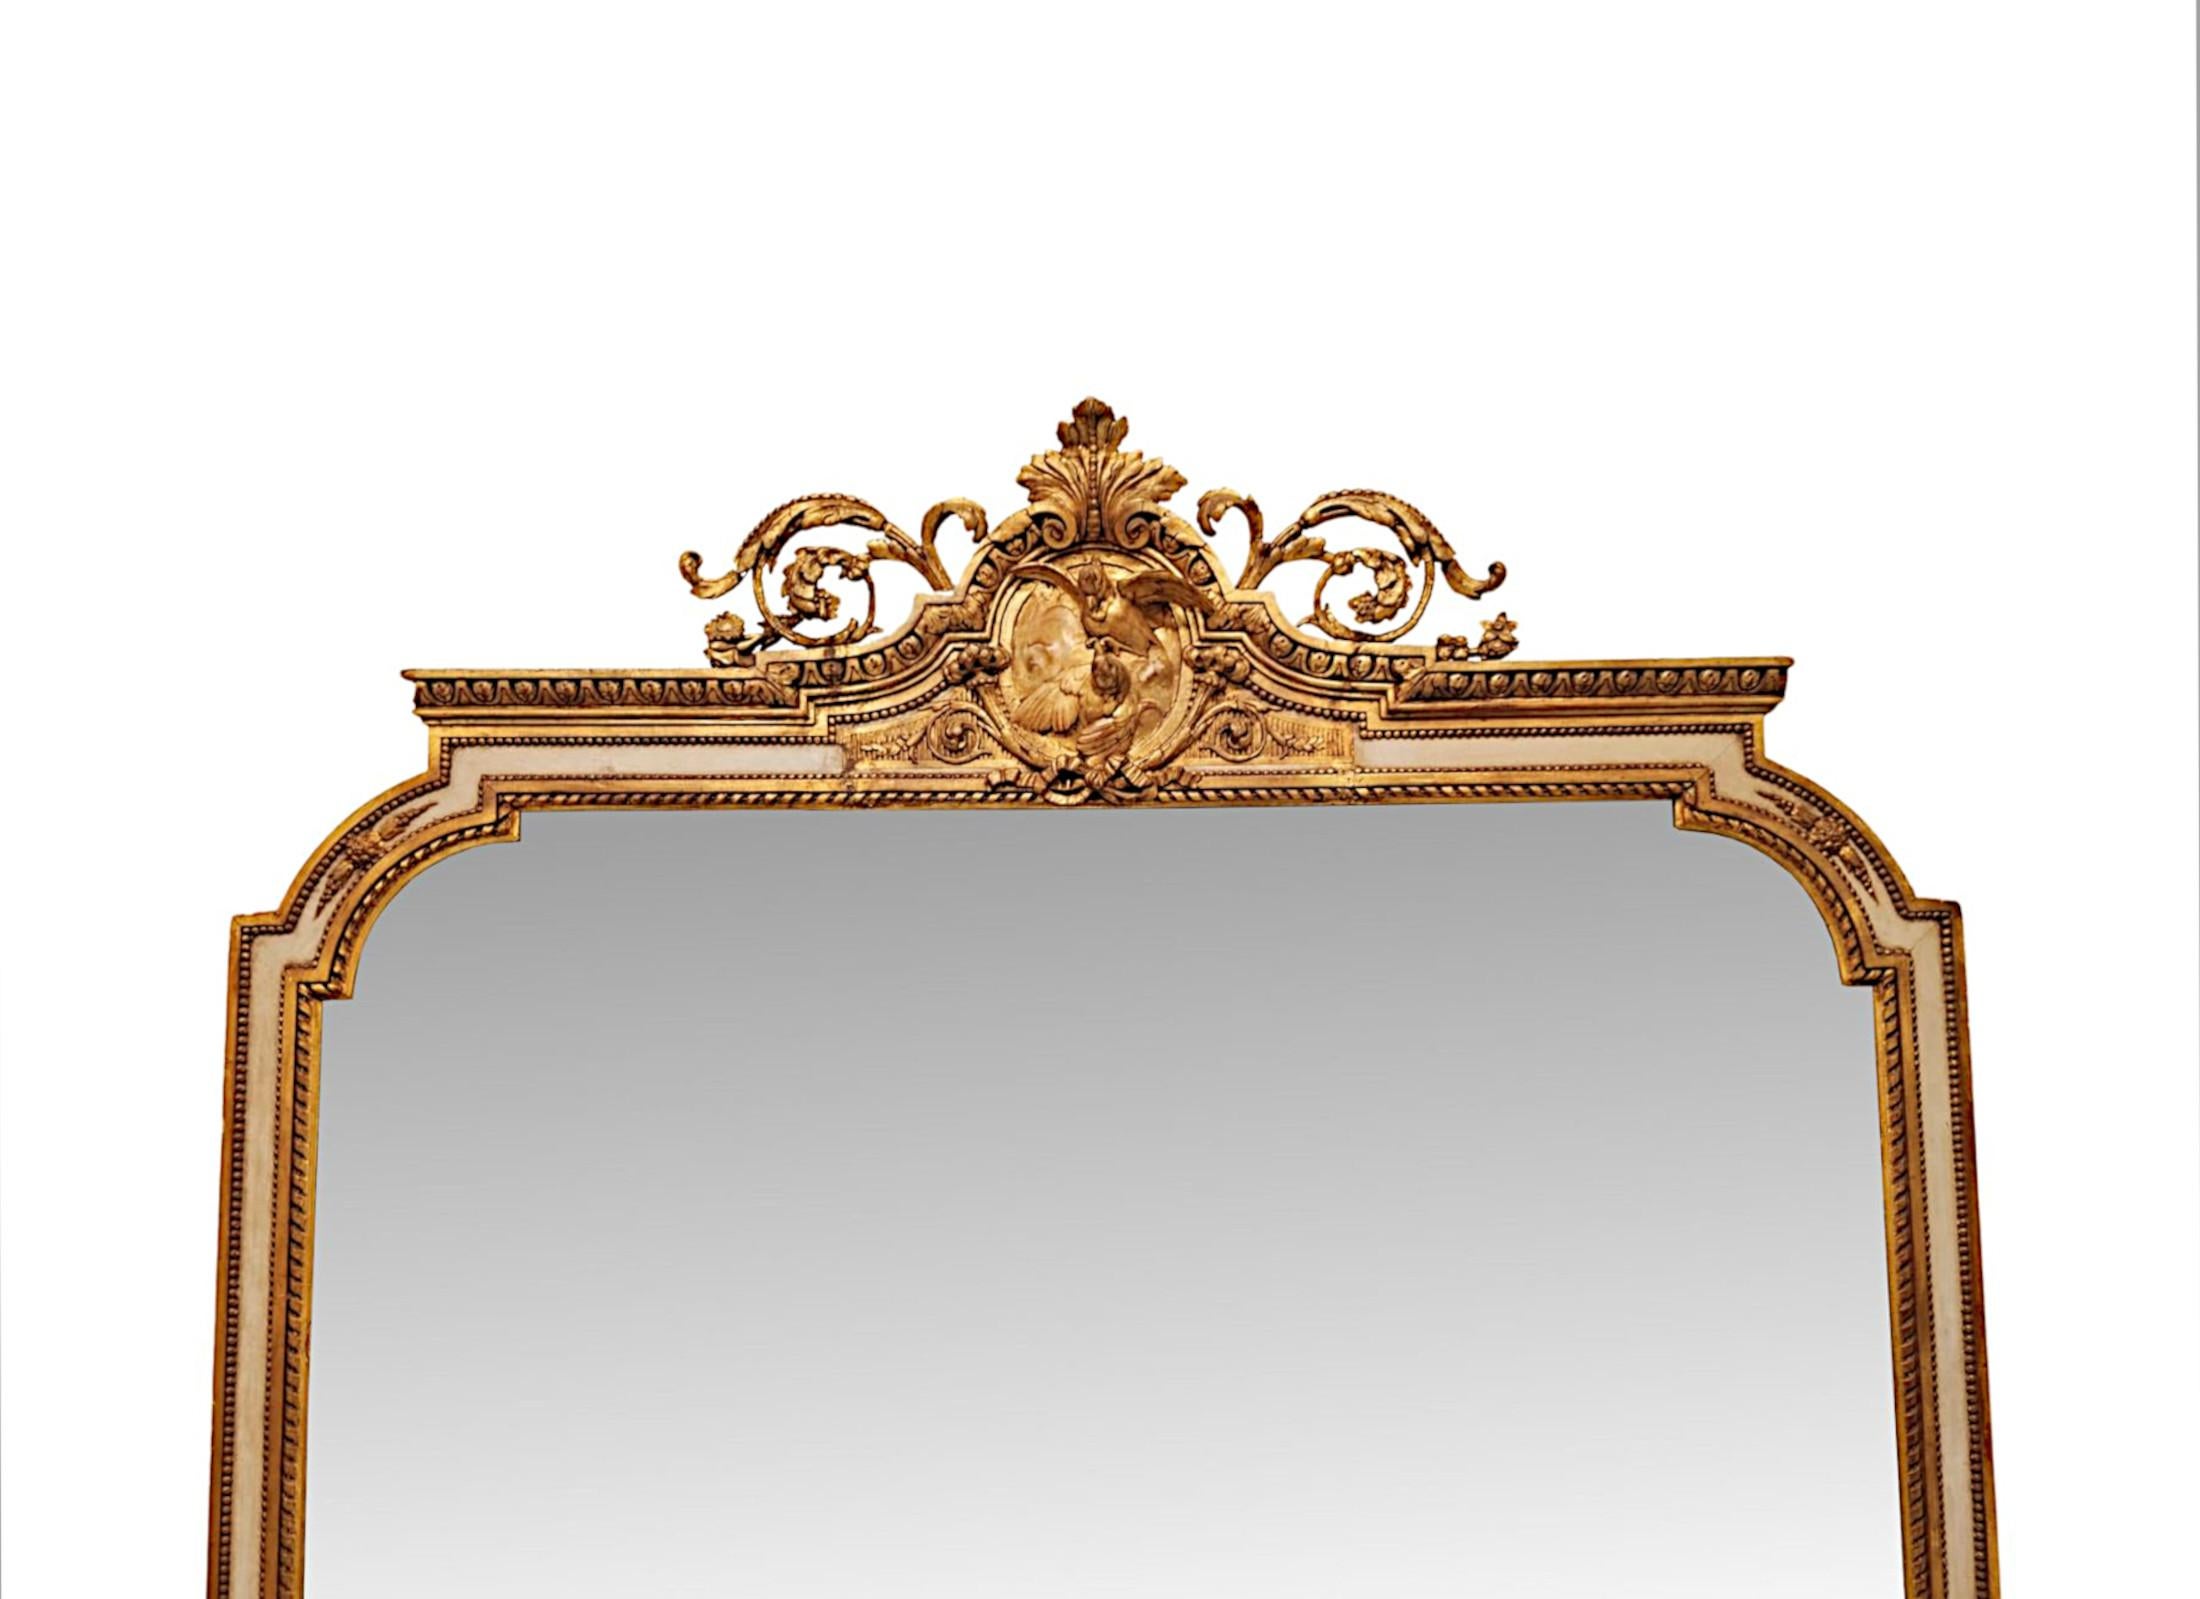 English An Exceptionally Rare 19th Century Giltwood Mirror by 'Lamb of Manchester' For Sale